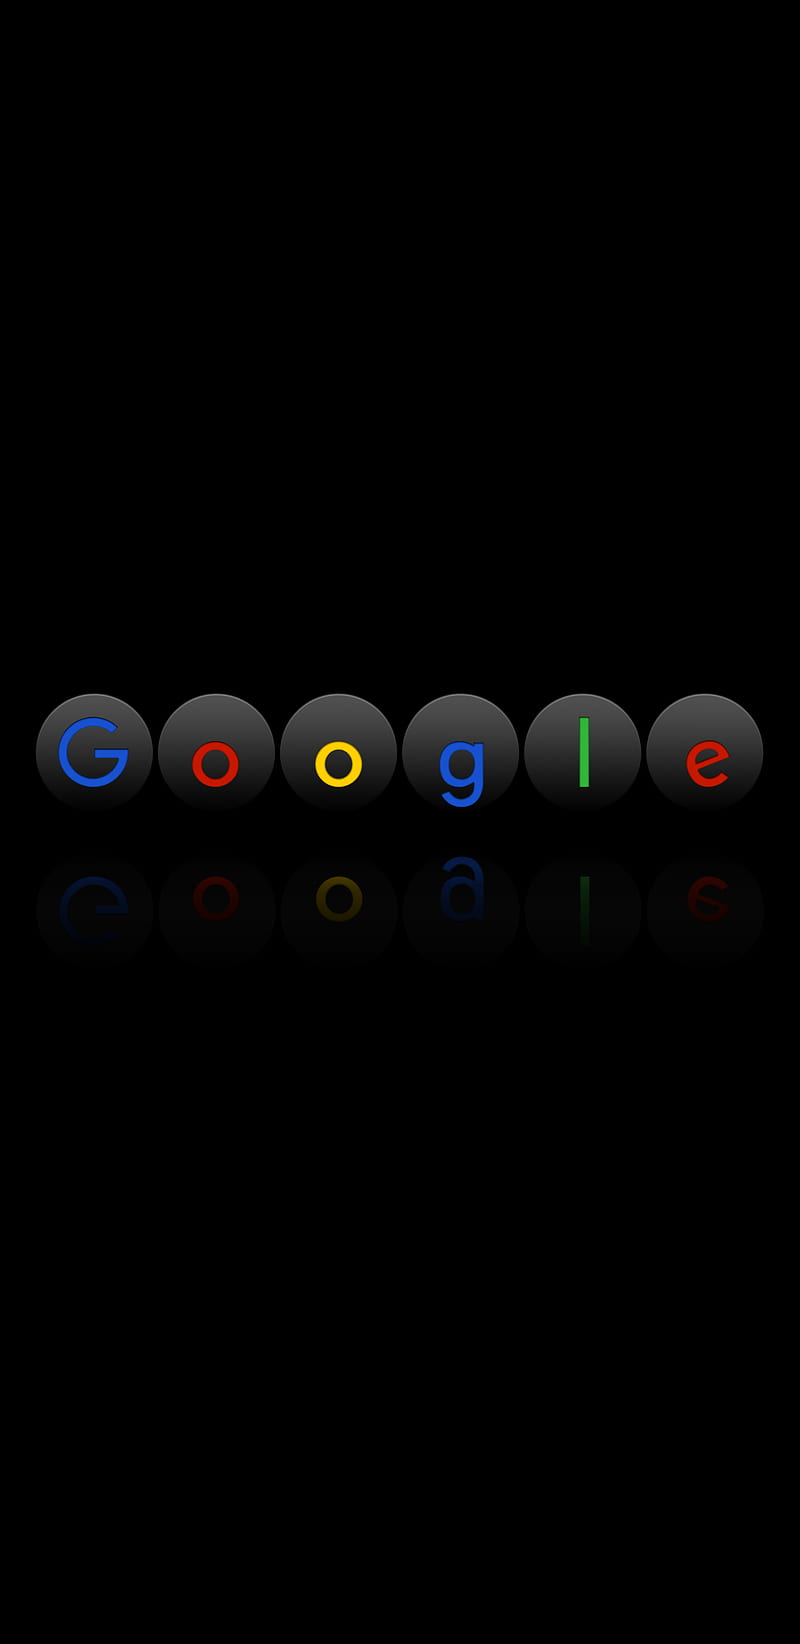 1920x1080px, 1080P free download | Google Buttons, 929, android, black